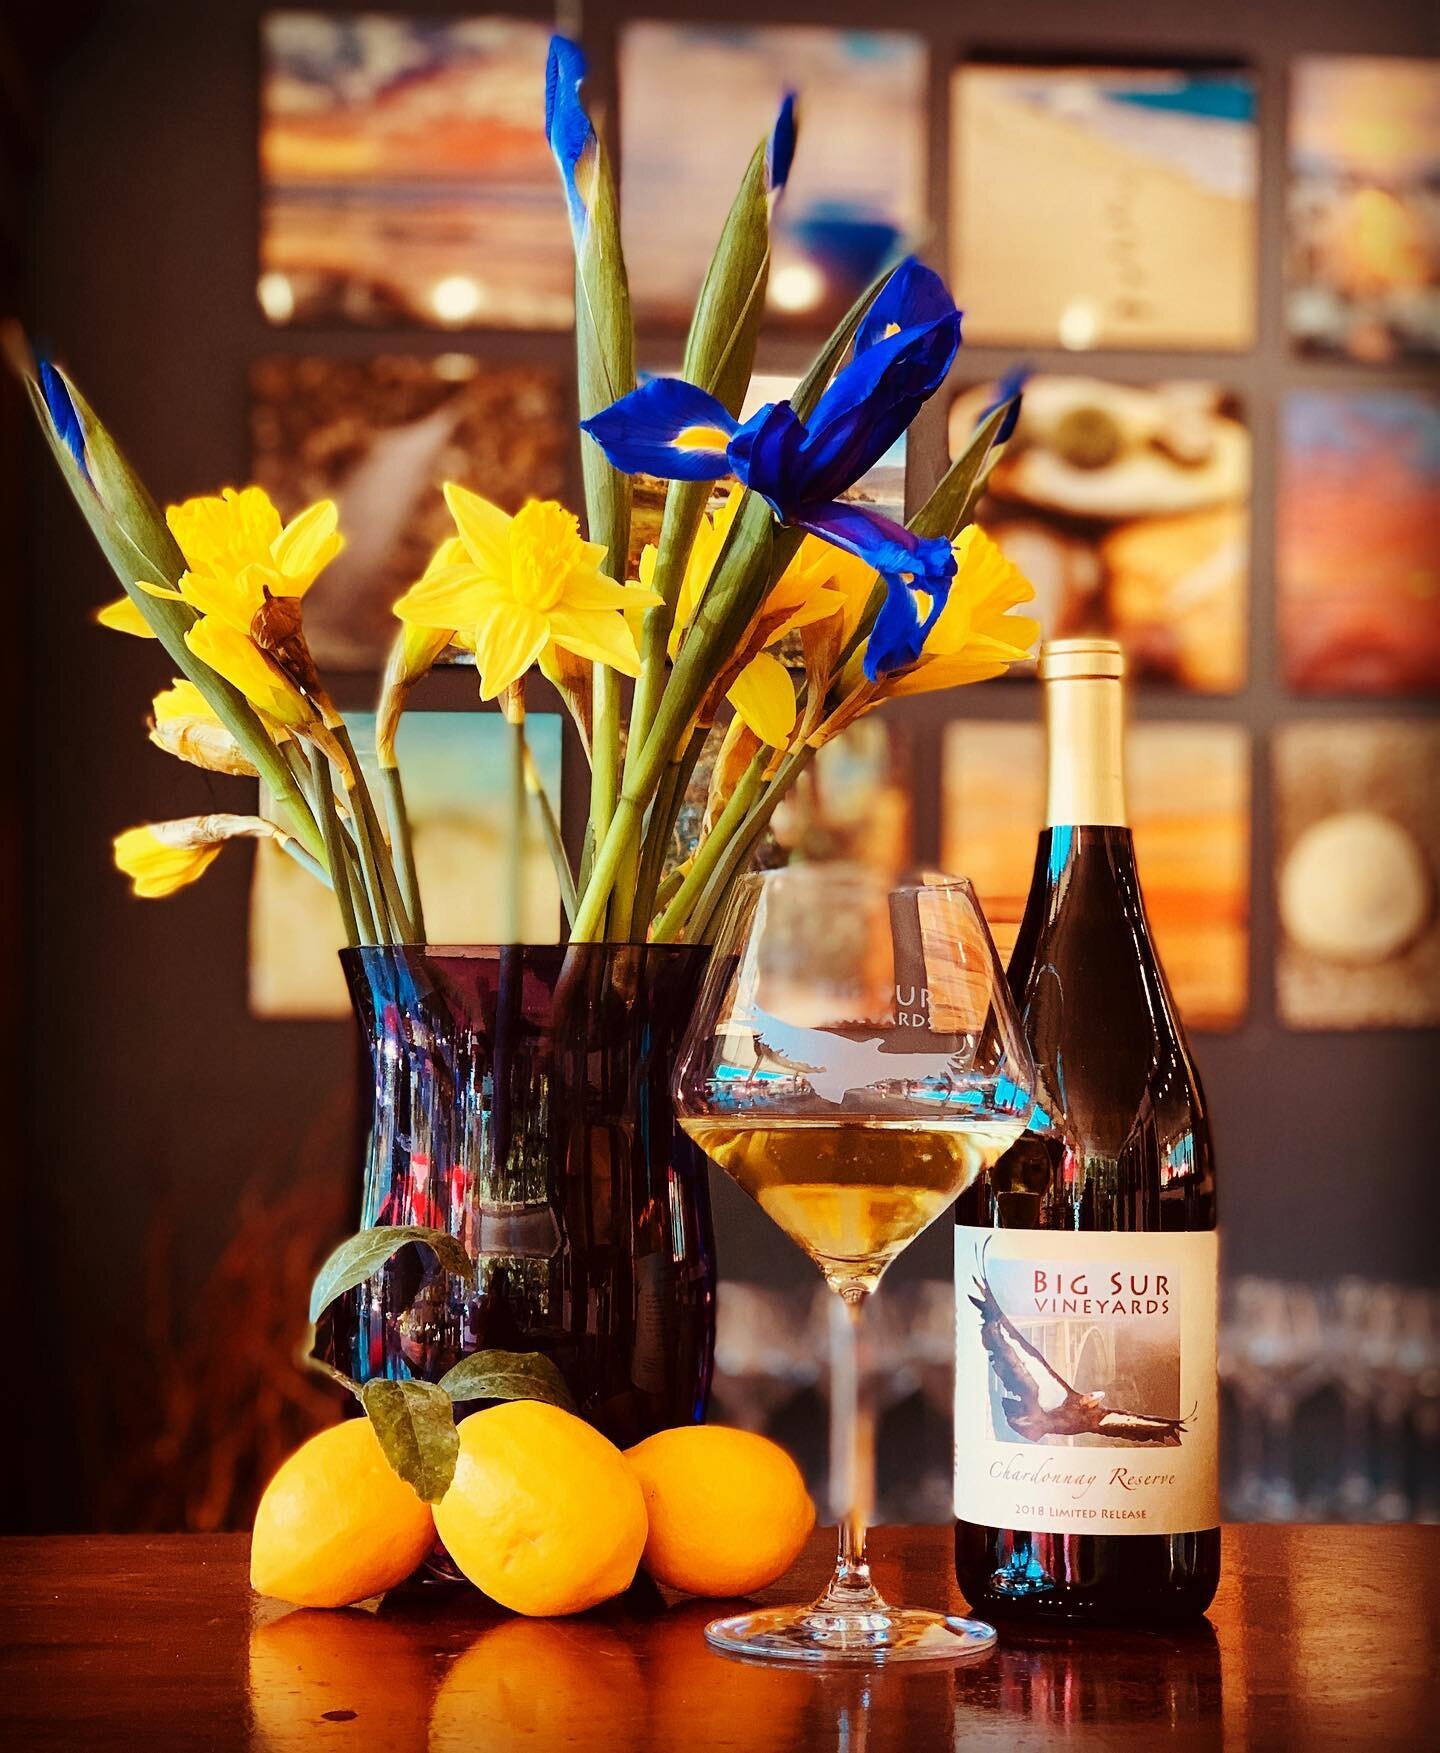 Another beautiful day in Carmel Valley. We&rsquo;re pouring our favorite Chardonnay today which has beautiful citrus notes! Stop by we&rsquo;re here until 6:00pm. #winetasting